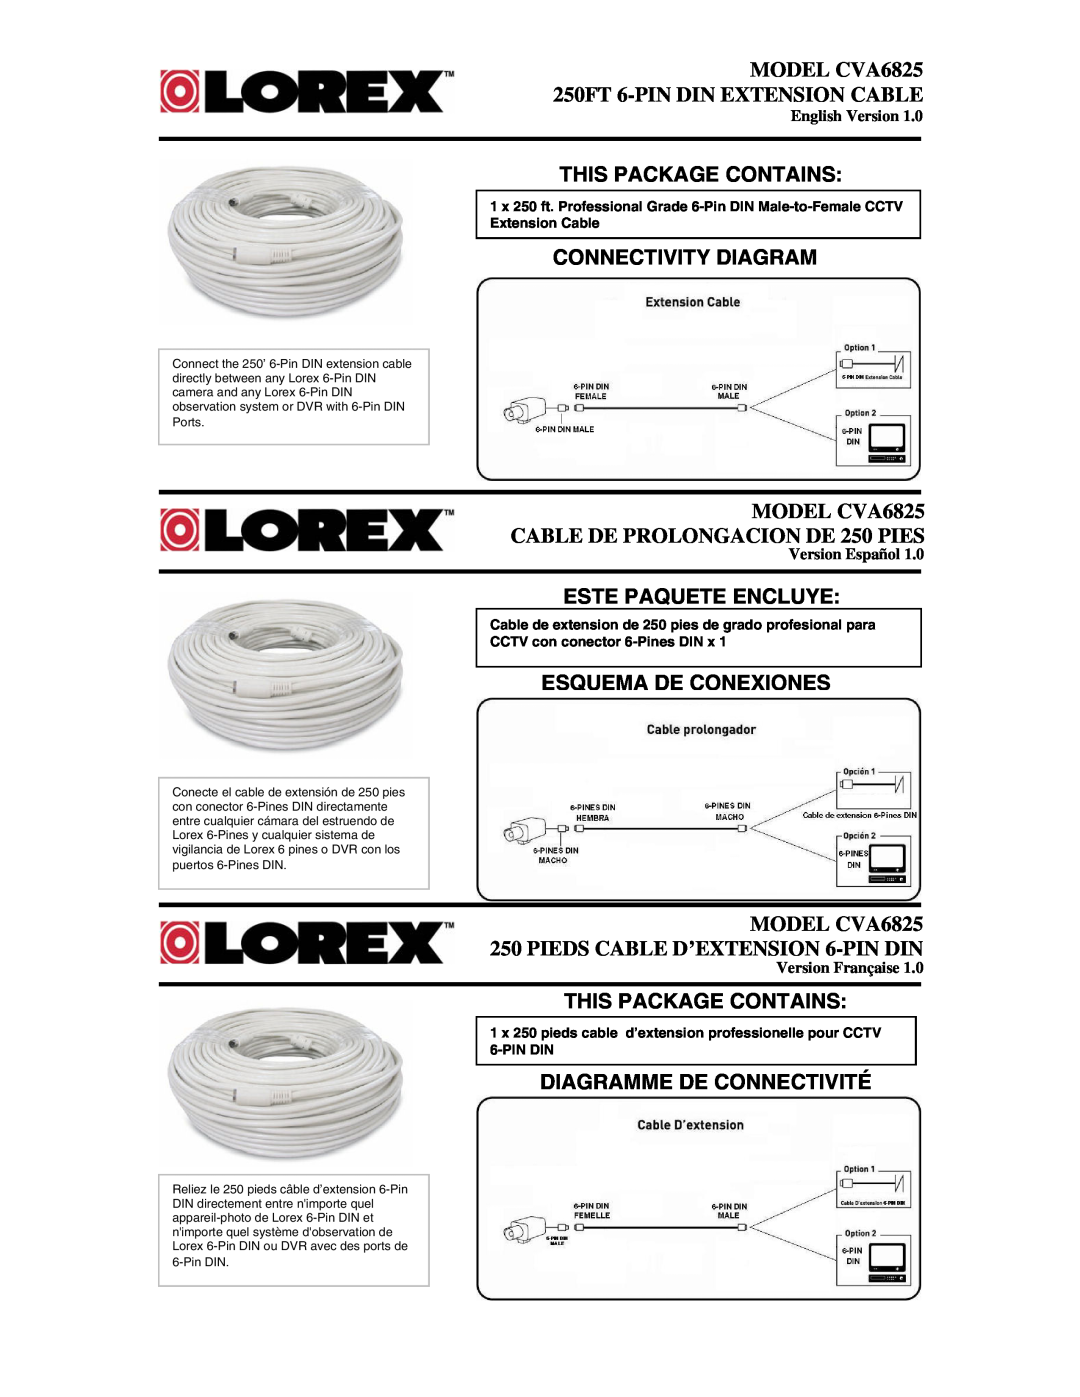 LOREX Technology manual MODEL CVA6825 250FT 6-PIN DIN EXTENSION CABLE, This Package Contains, Connectivity Diagram 